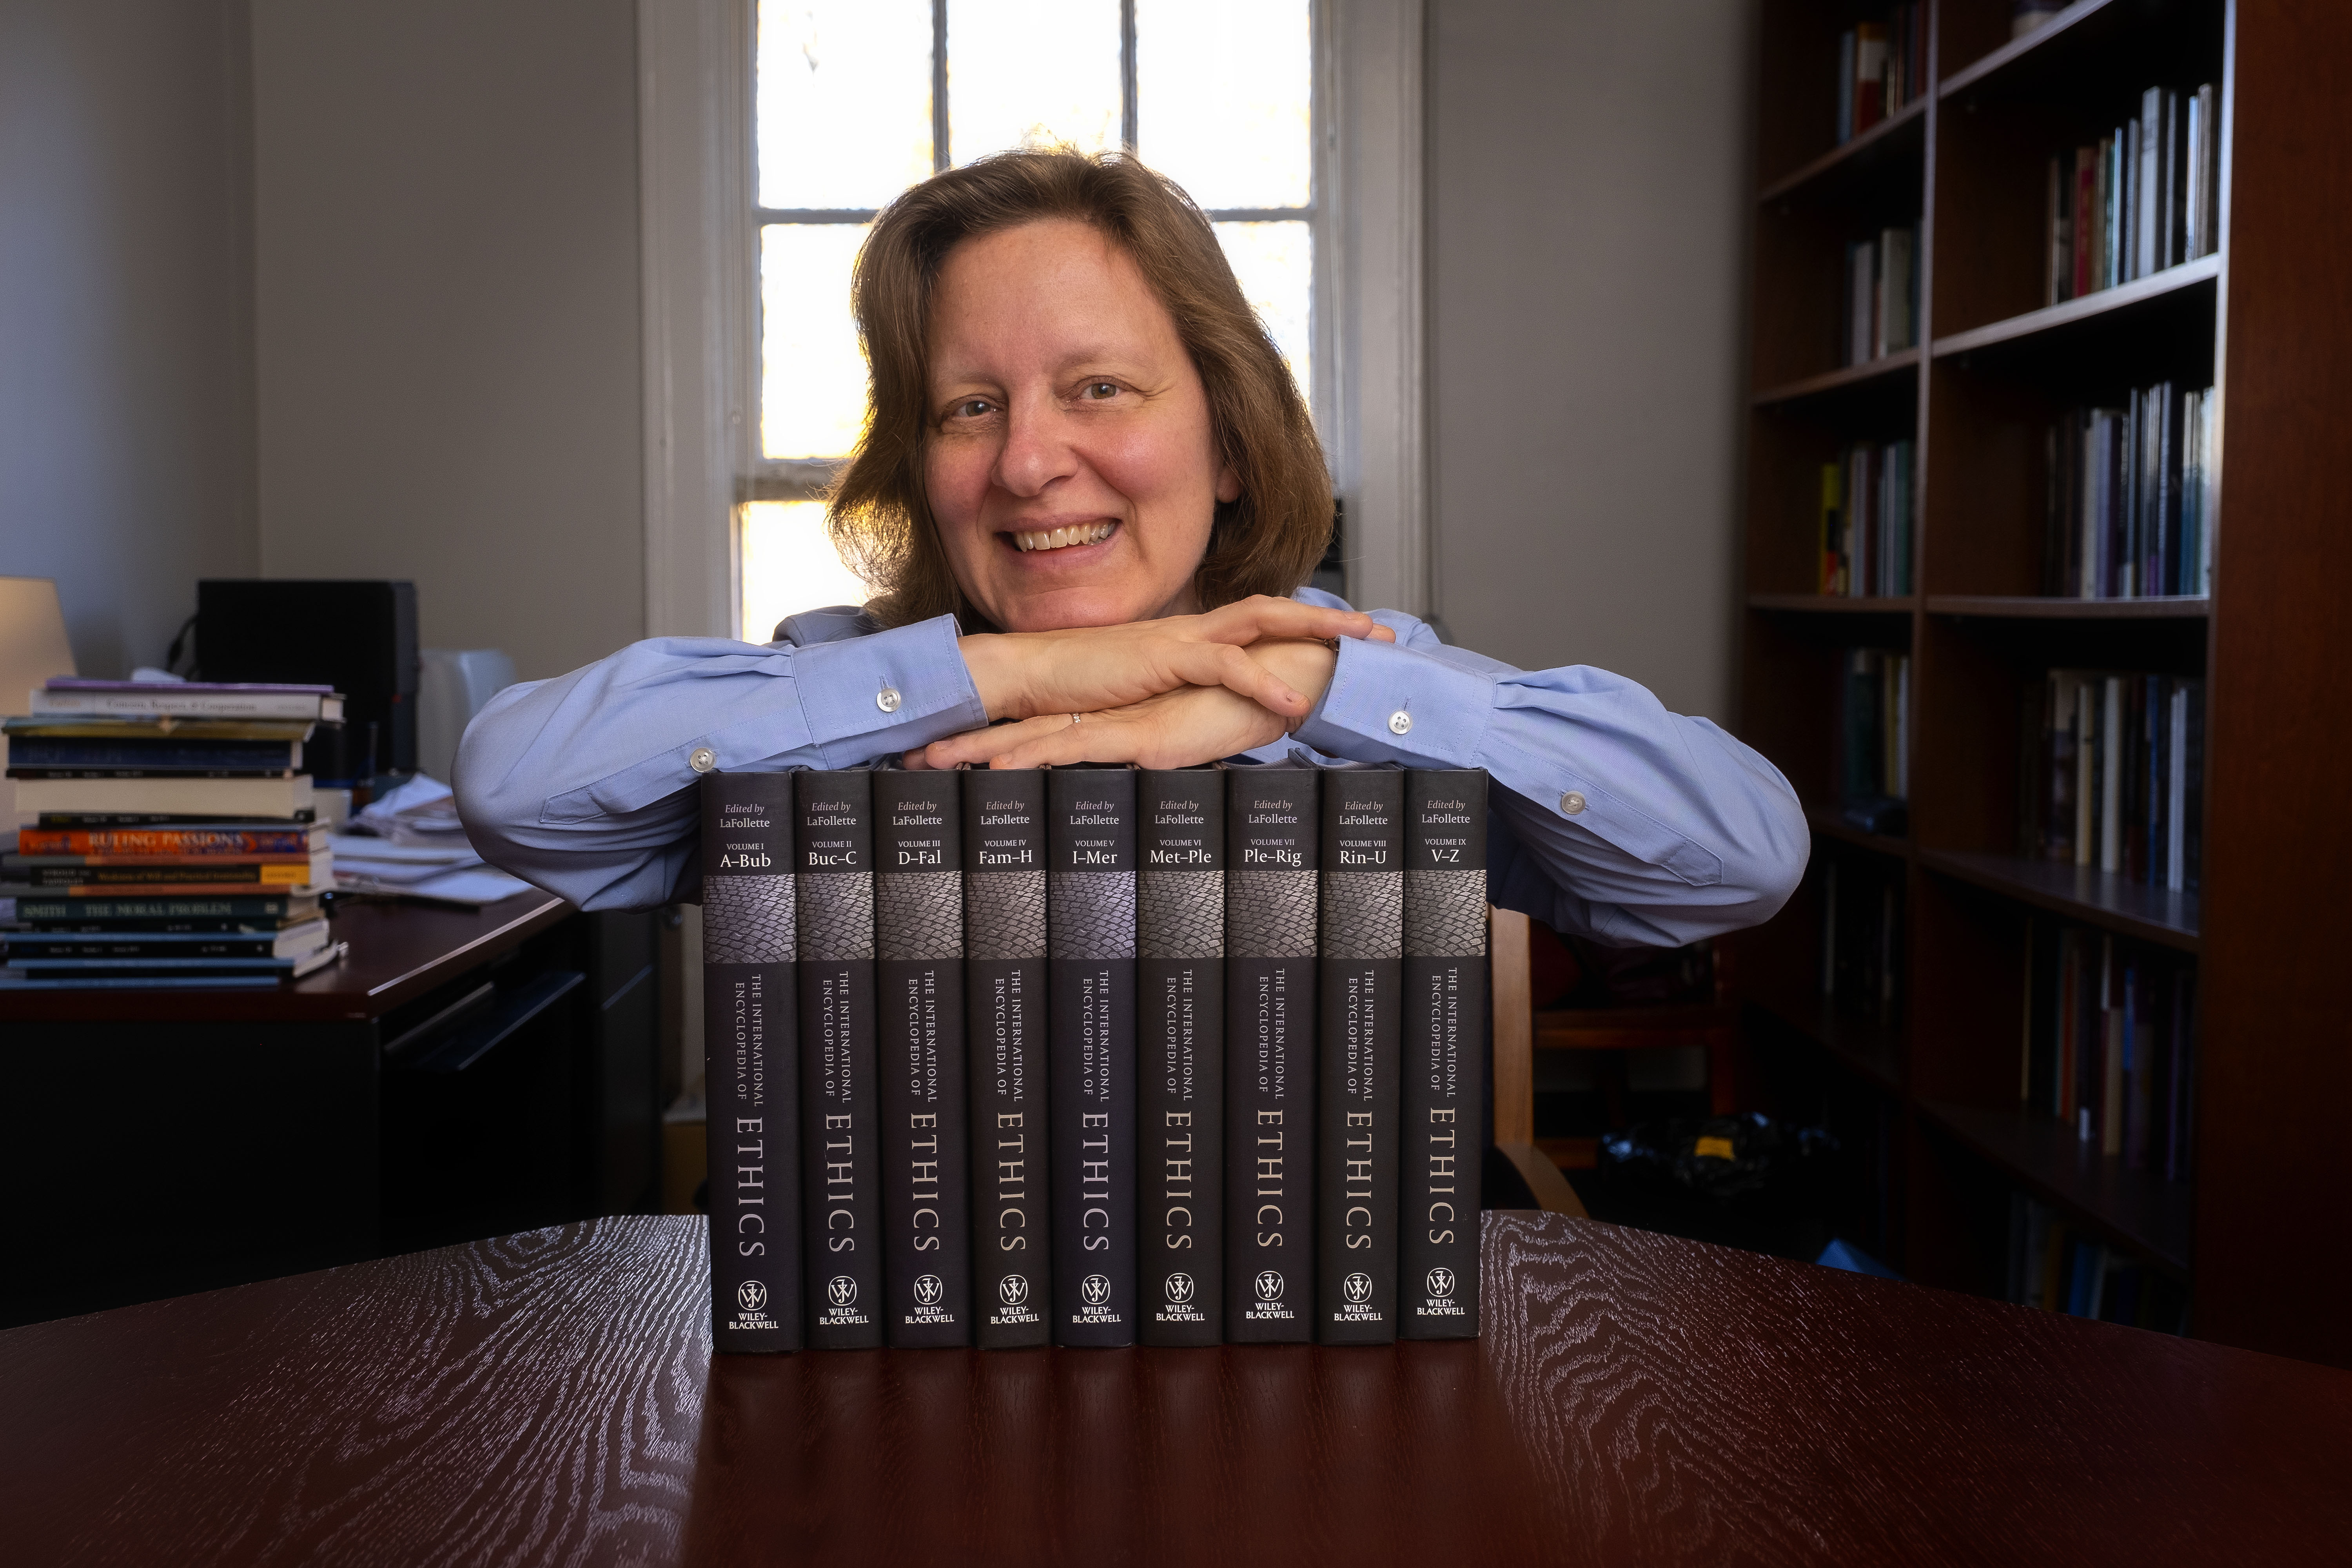 Sarah Stroud, director of the Parr Center for Ethics, is a co-editor of the Encyclopedia for Ethics, a multi-volume set of books. (photo by Jon Gardiner/UNC-Chapel Hill)